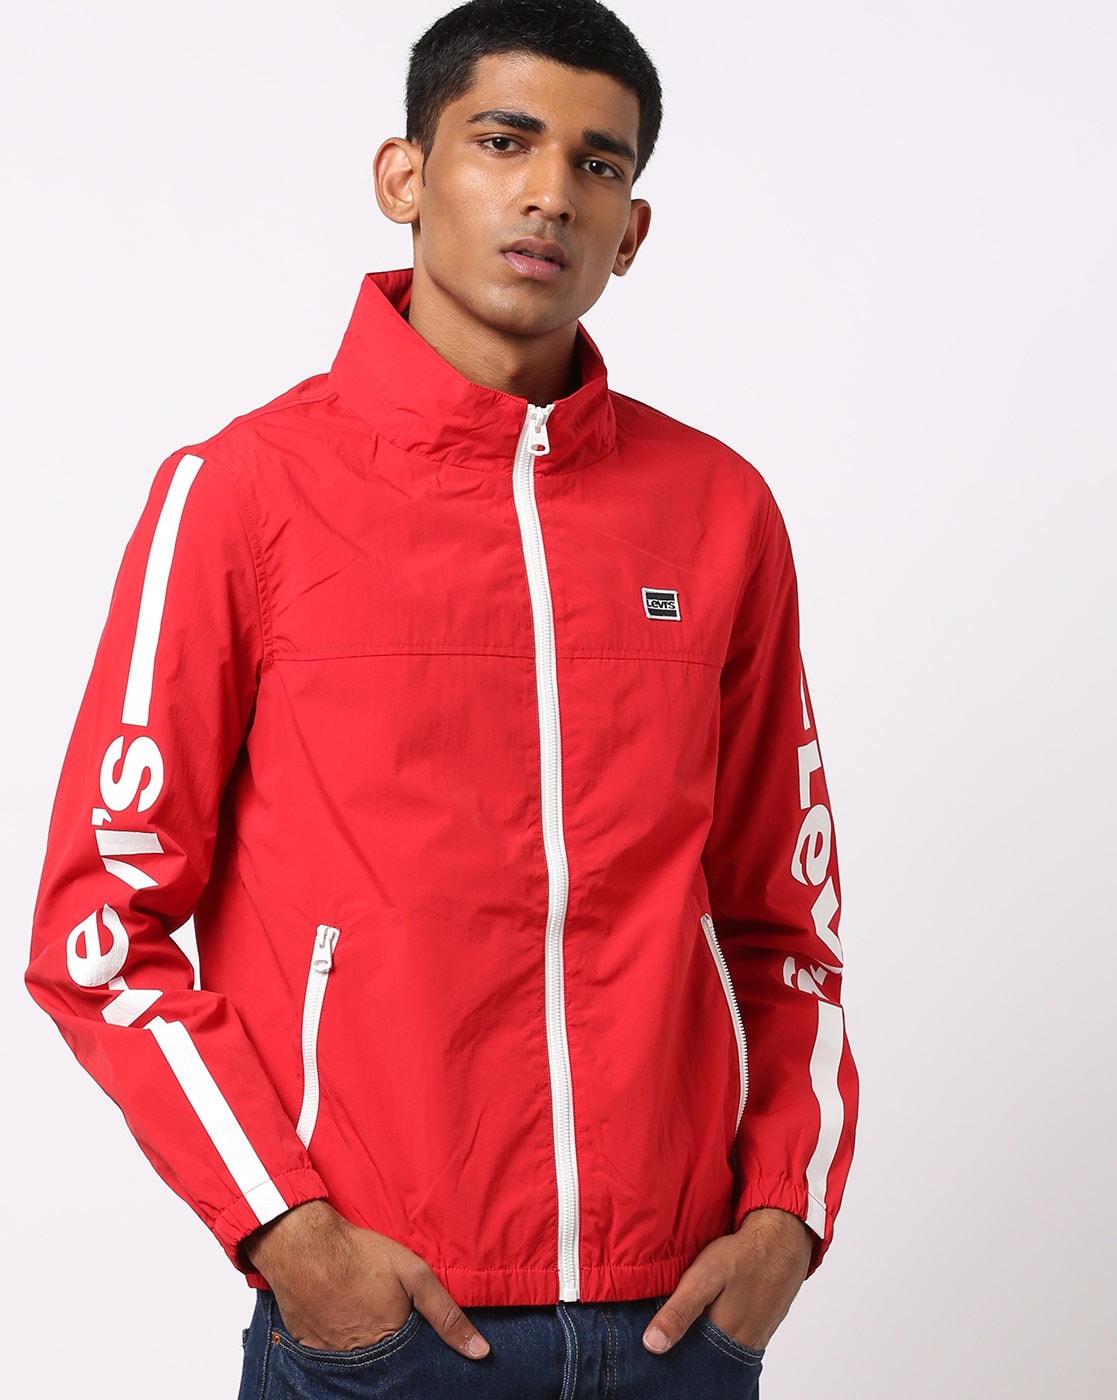 levi's red jacket